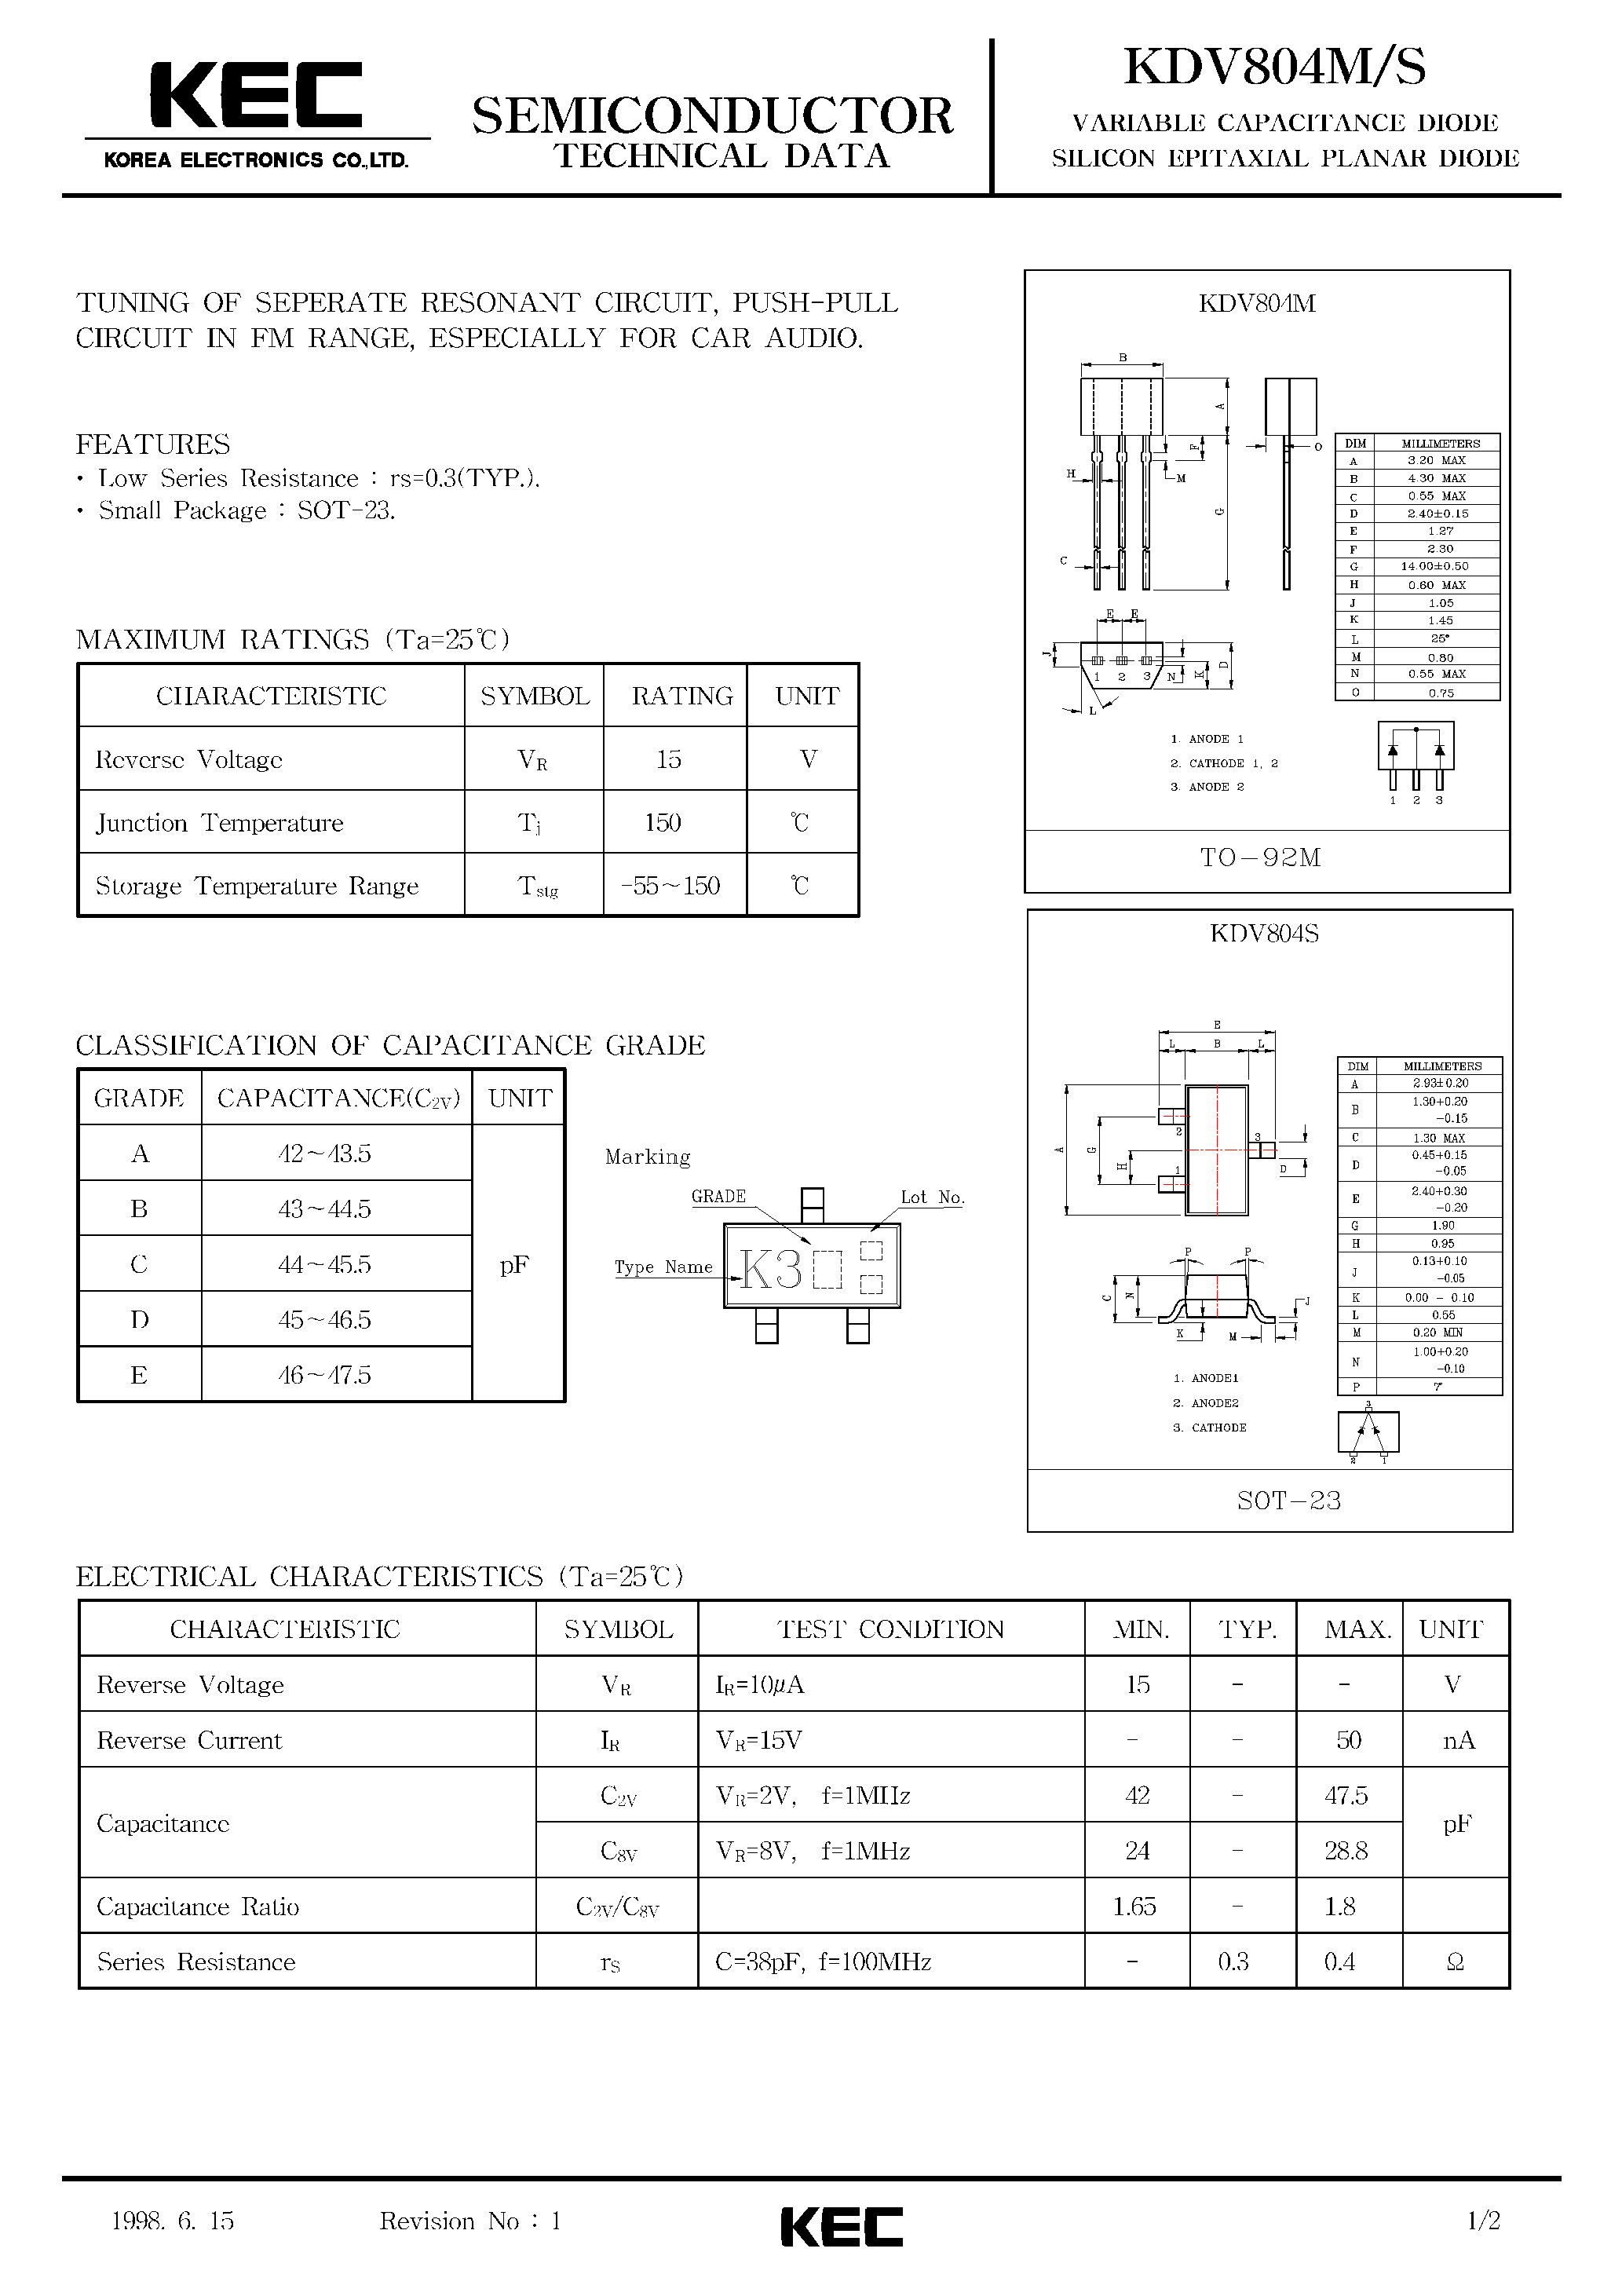 Datasheet KDV804S - VARIABLE CAPACITANCE DIODE SILICON EPITAXIAL PLANAR DIODE(TUNING OF SEPERATE RESONANT CIRCUIT) page 1